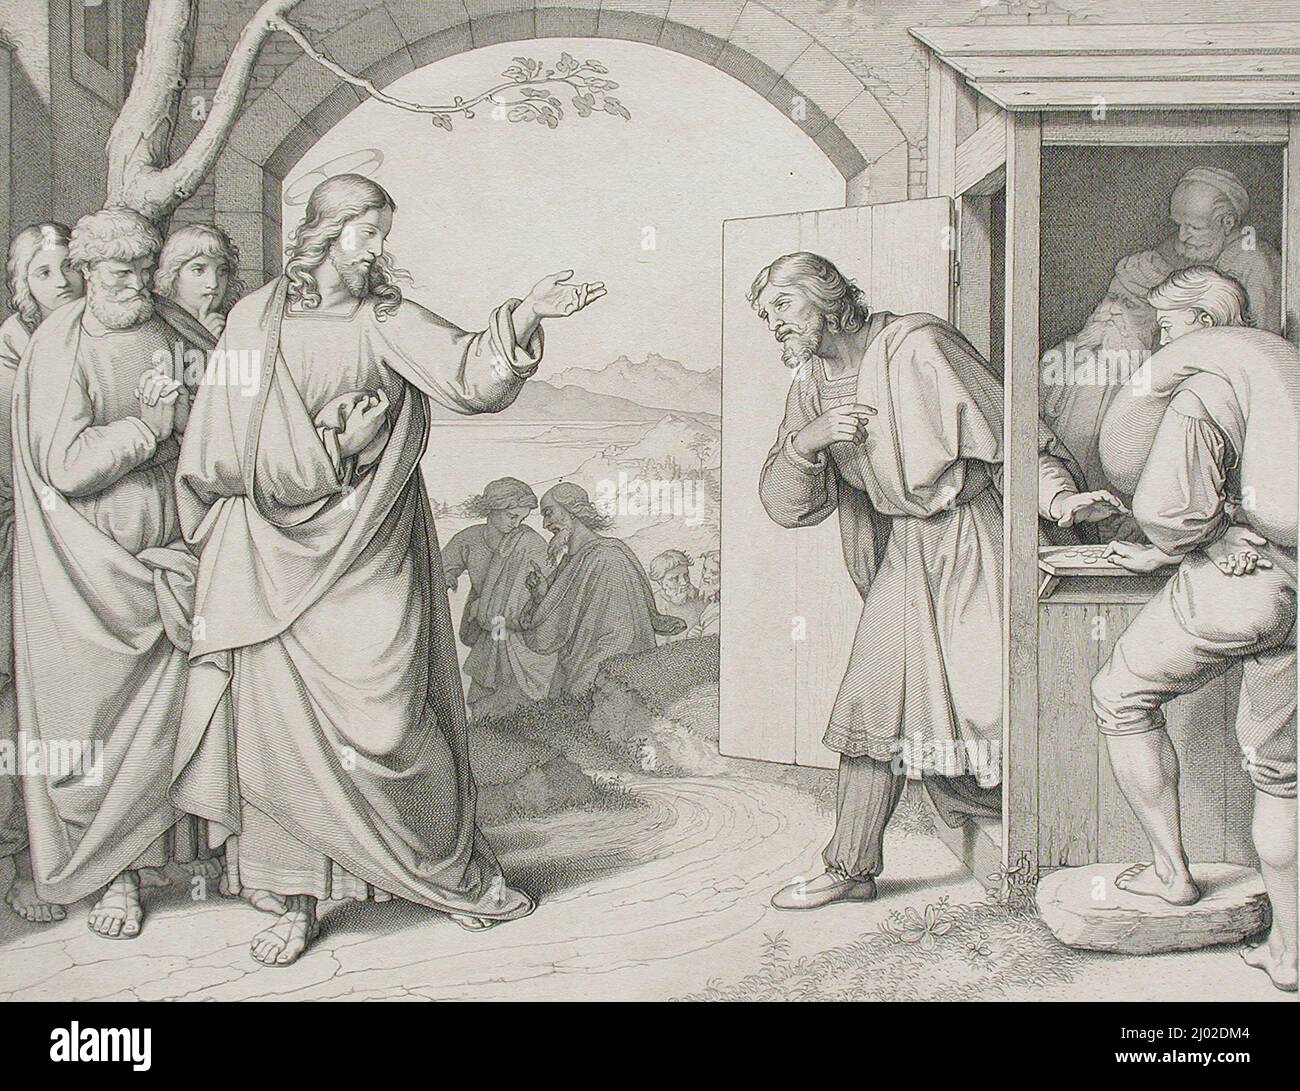 The Calling of Matthew. Johann Friedrich Overbeck (after) (Germany, Lubeck, 1789-1869). Germany, 1846. Prints; engravings. Engraving Stock Photo